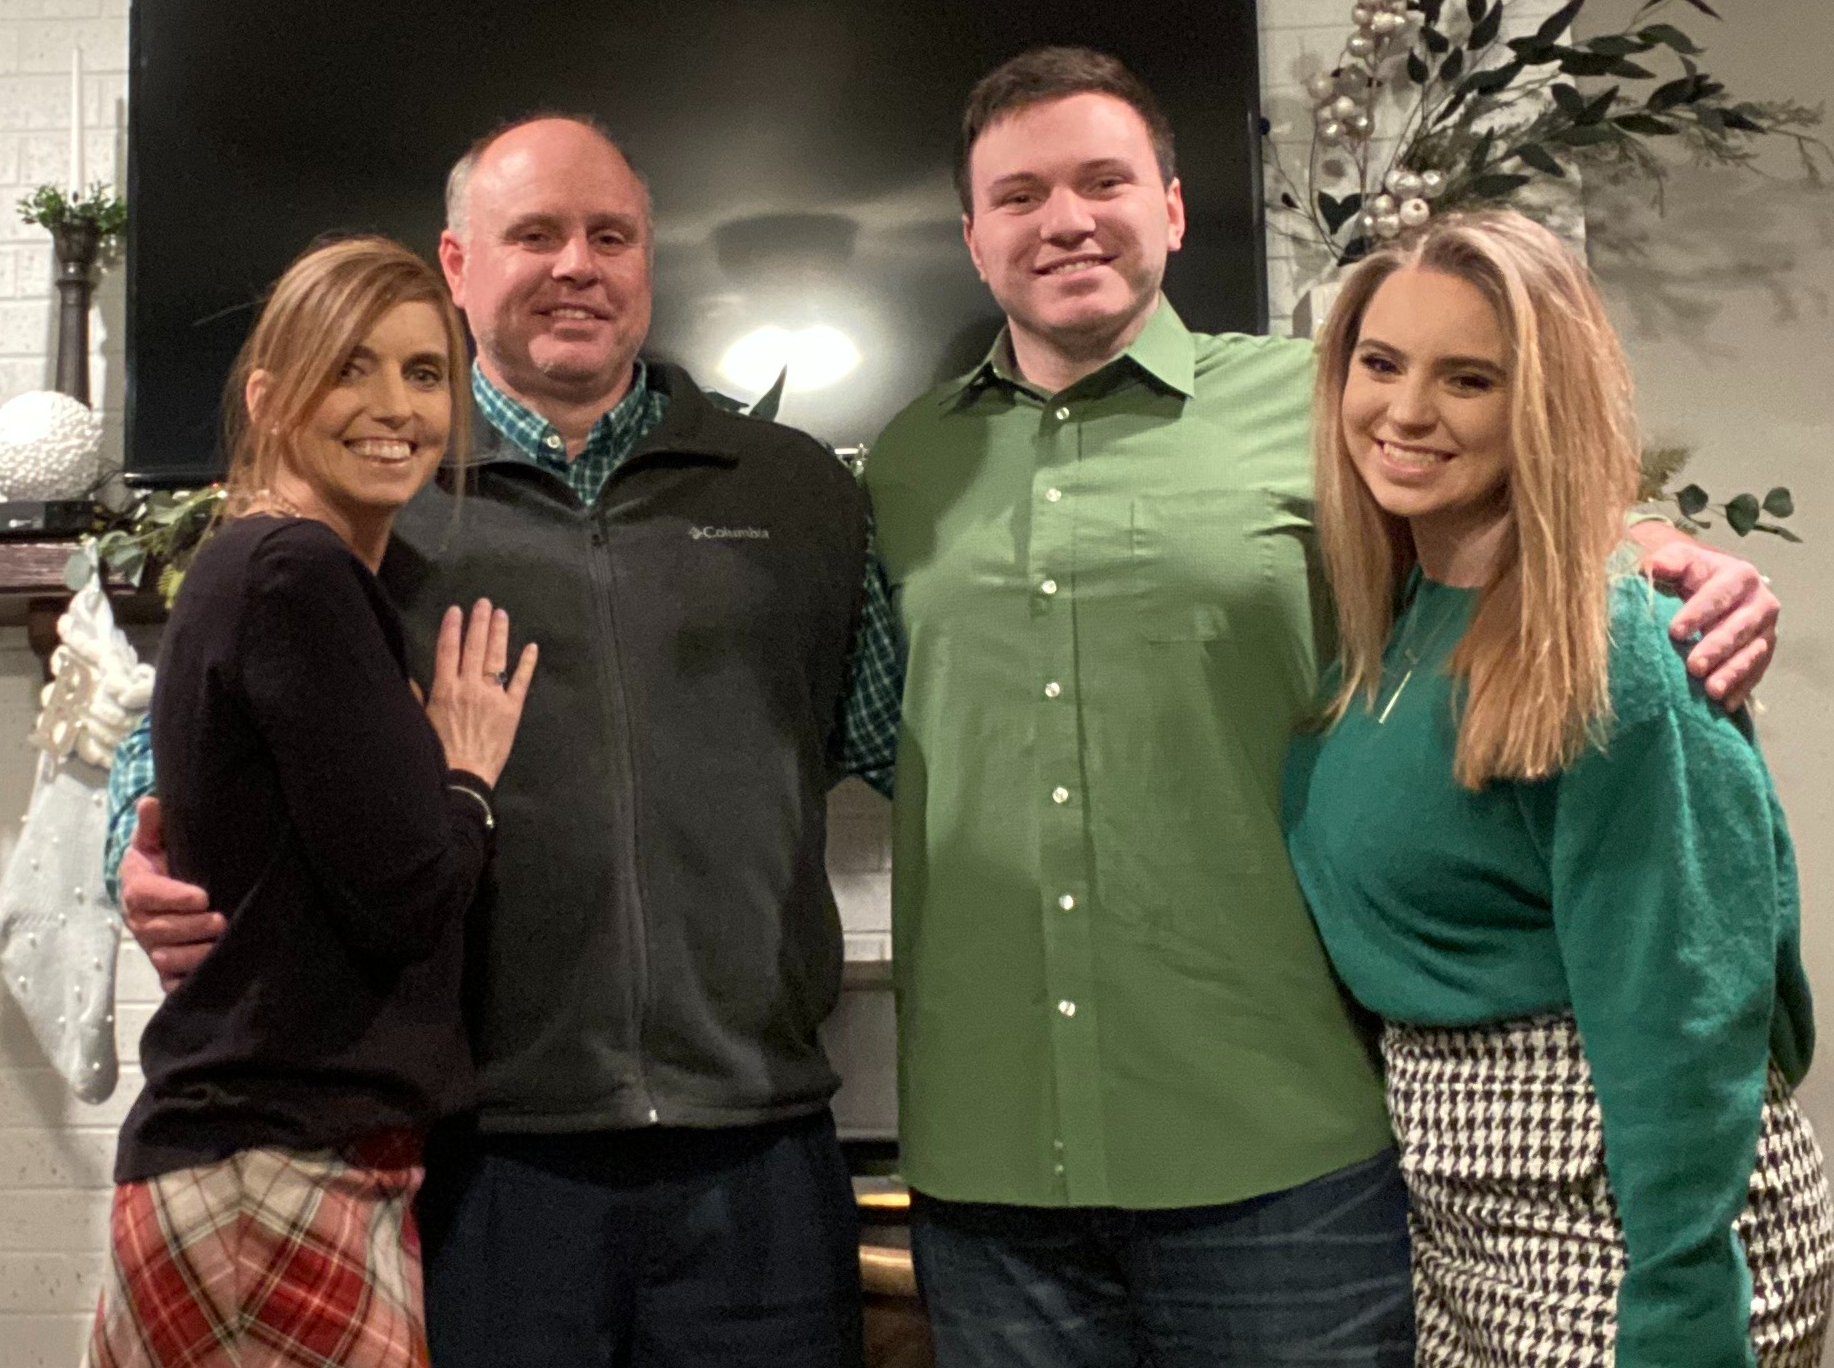 Jennifer and her family at Christmas in 2019